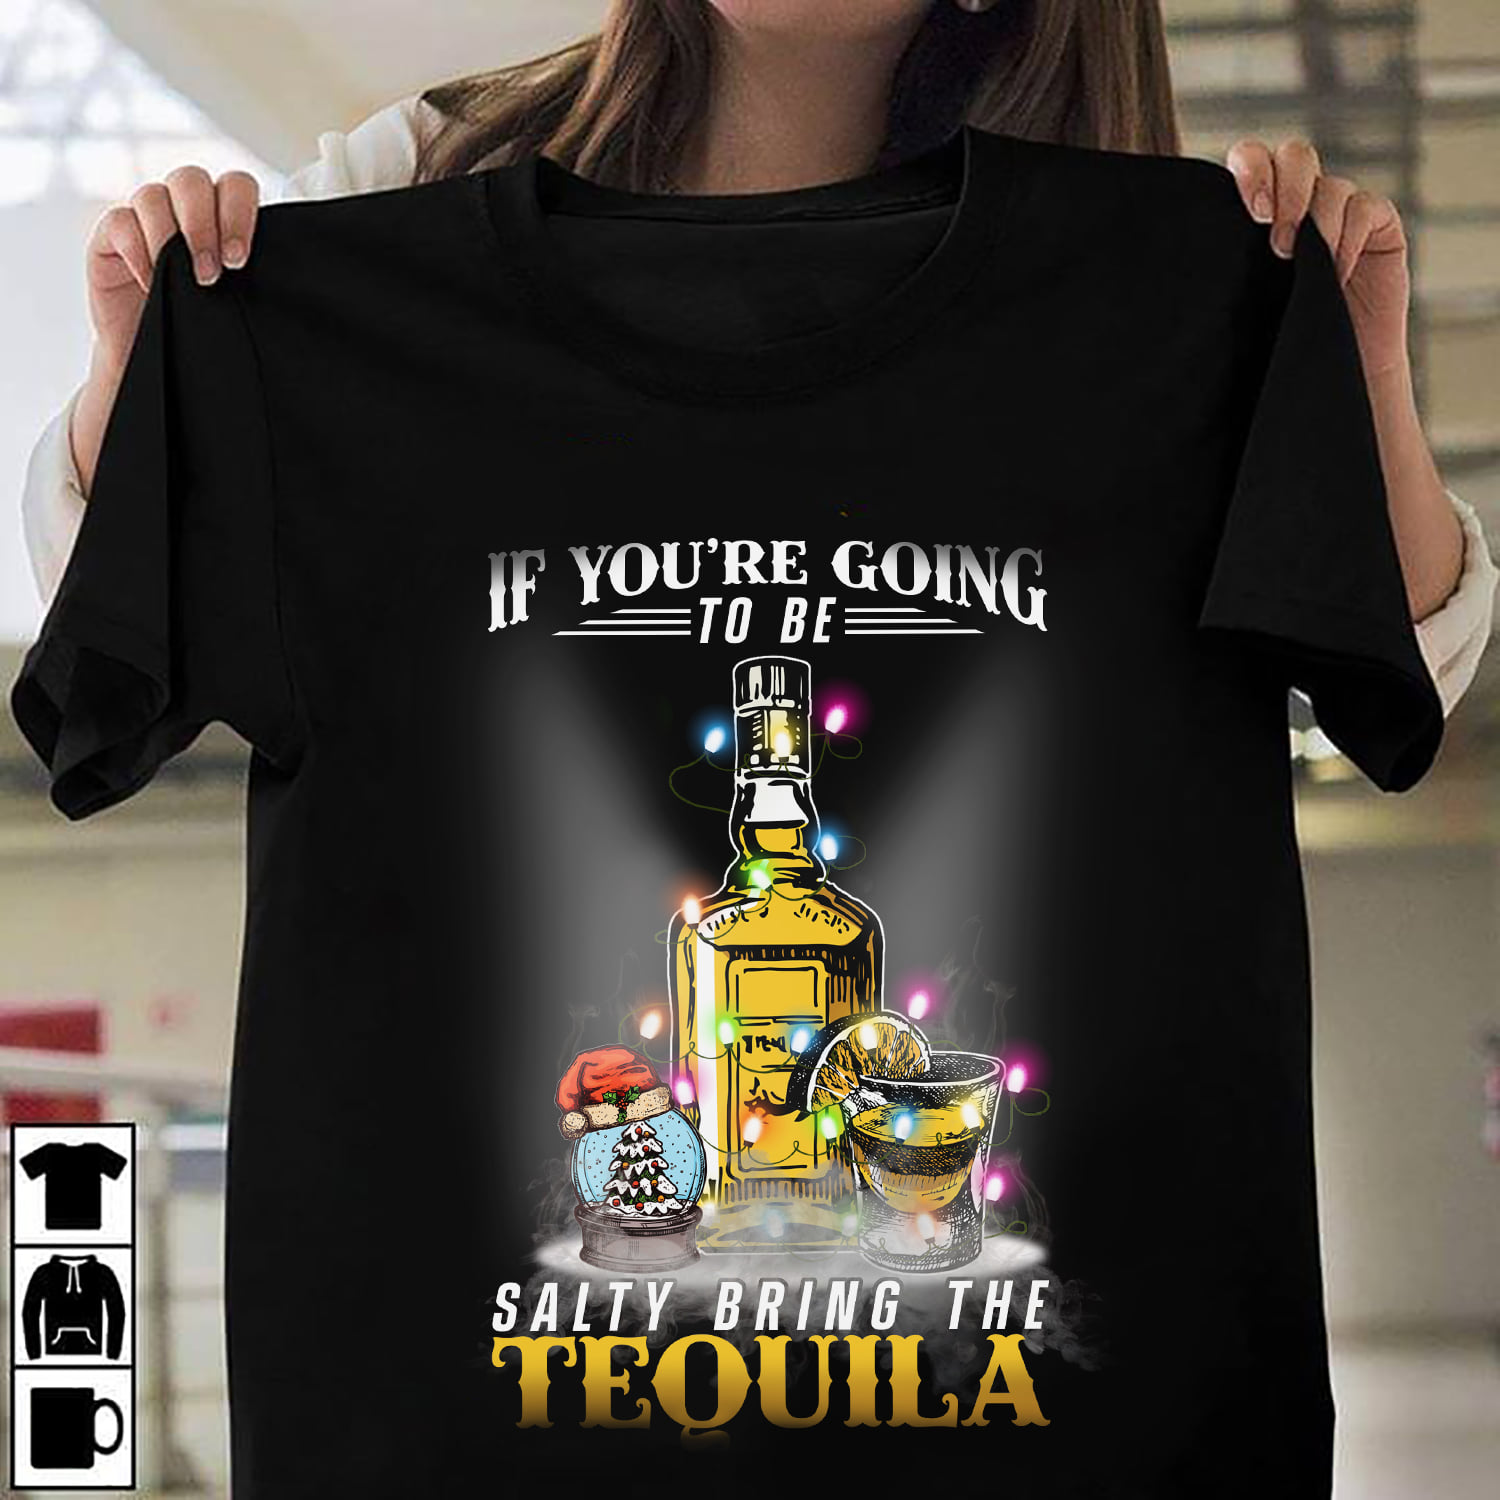 Christmas Tequila - If you're going to be salty bring the tequila